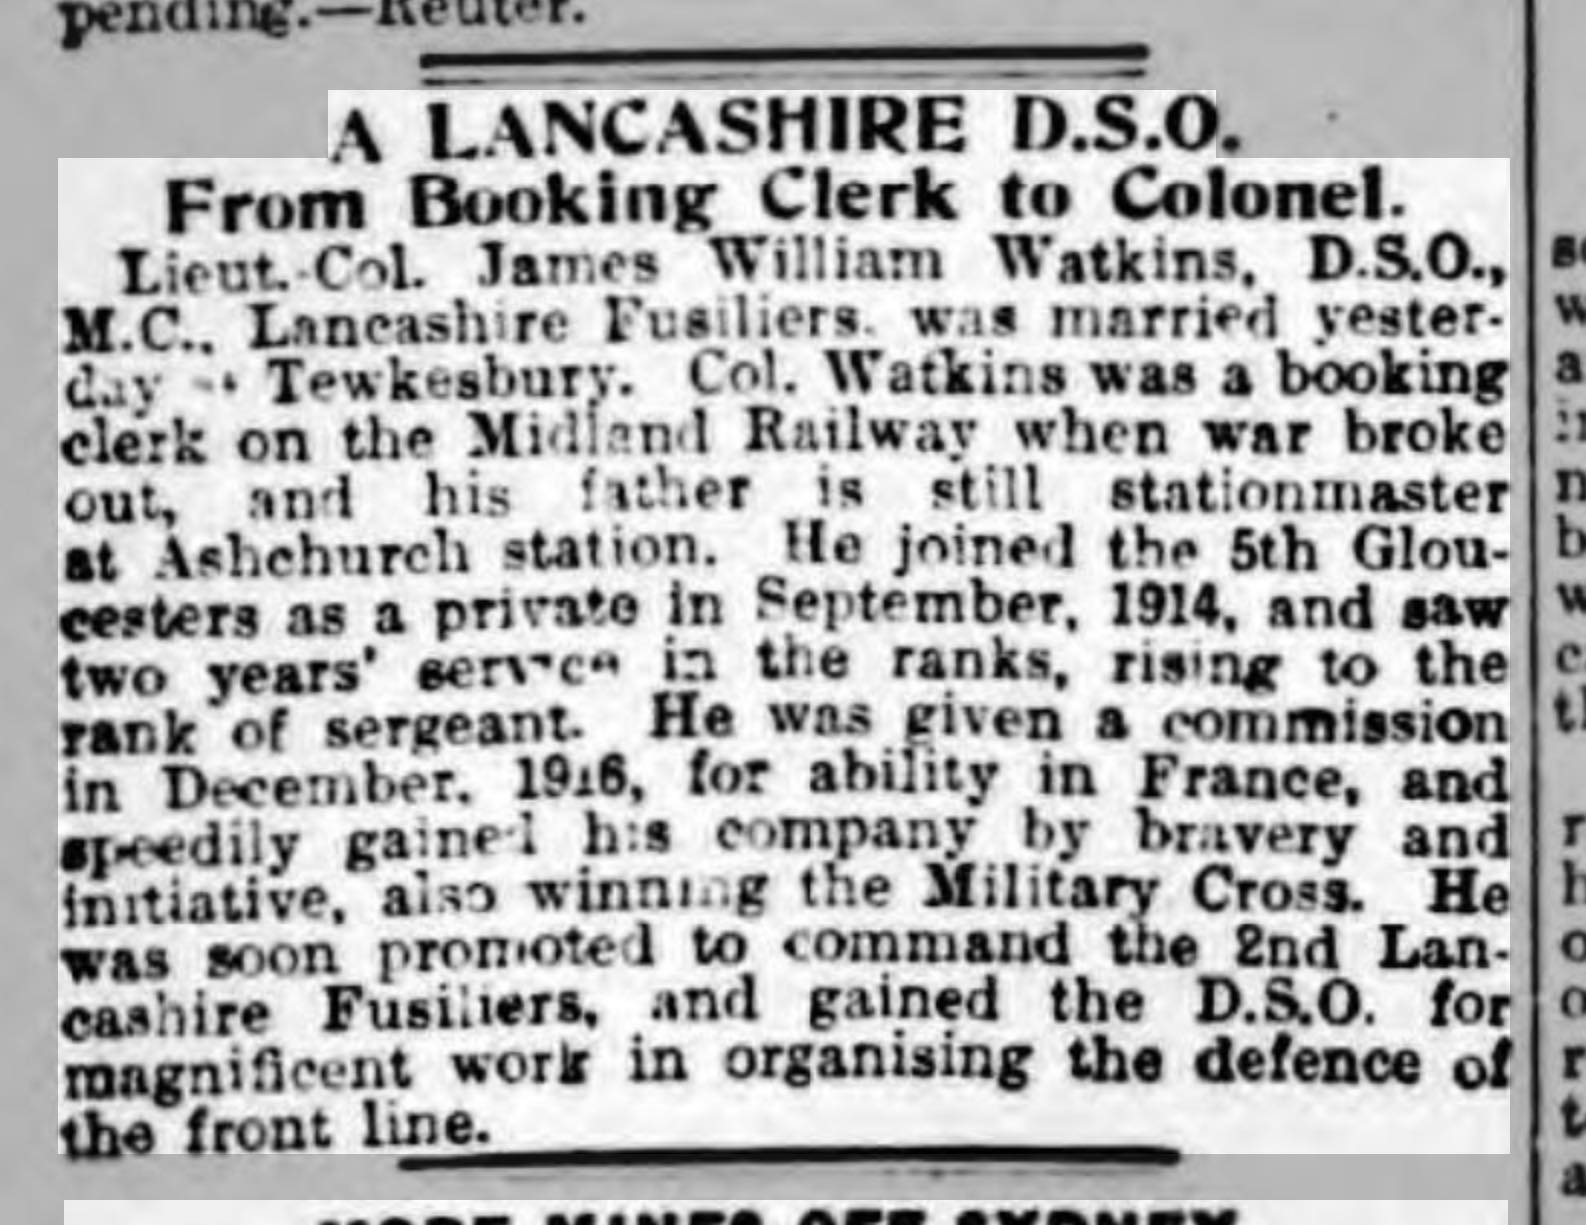 Press clipping from the Manchester Evening News 16 August 1918 relating to James Watkins marriage and a short biography